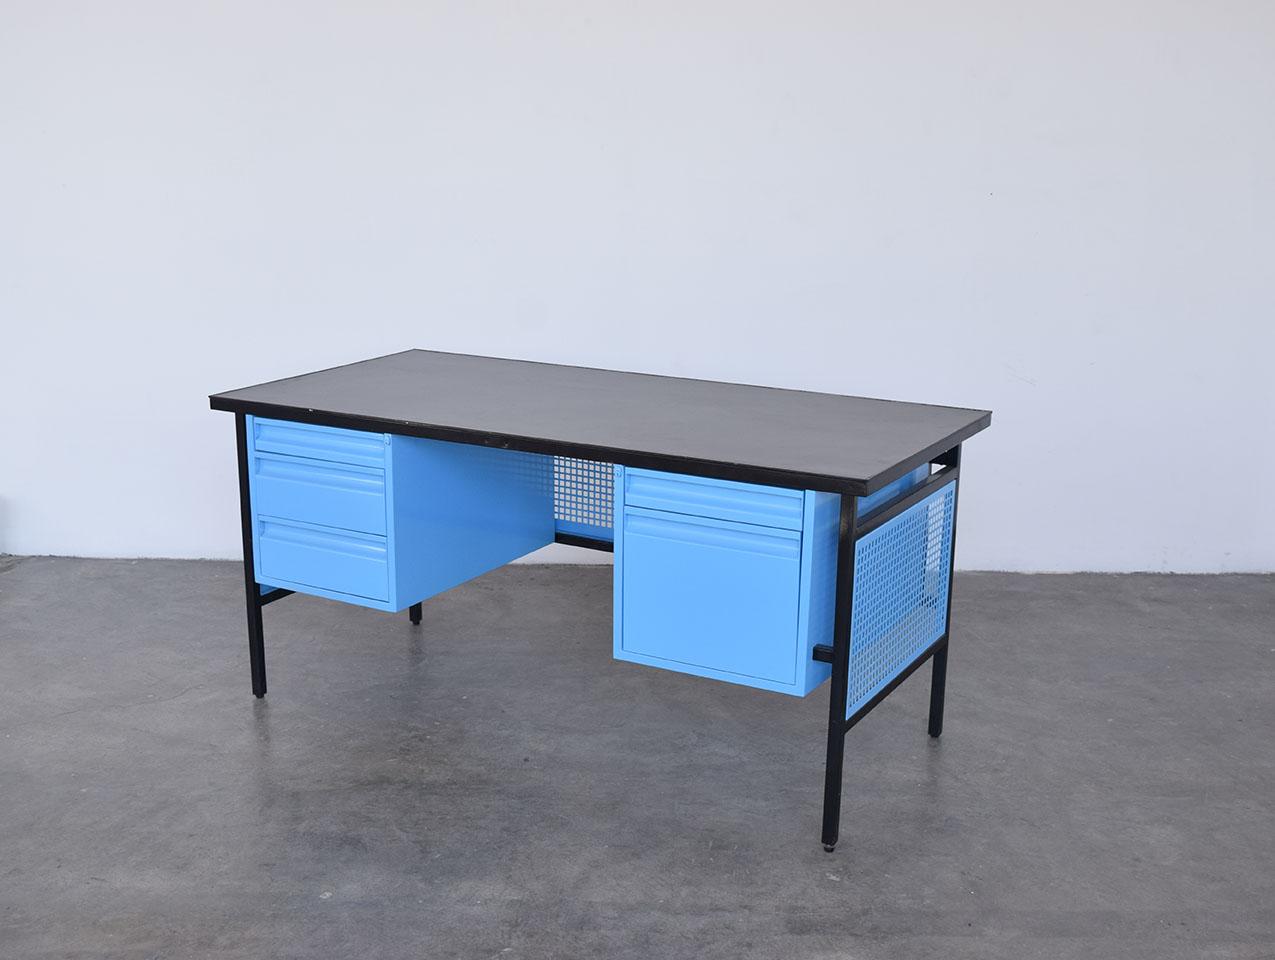 Made in Mexico the 1950s for the Office steel furniture company DM Nacional Company.
Attributed to Clara Porset.
  